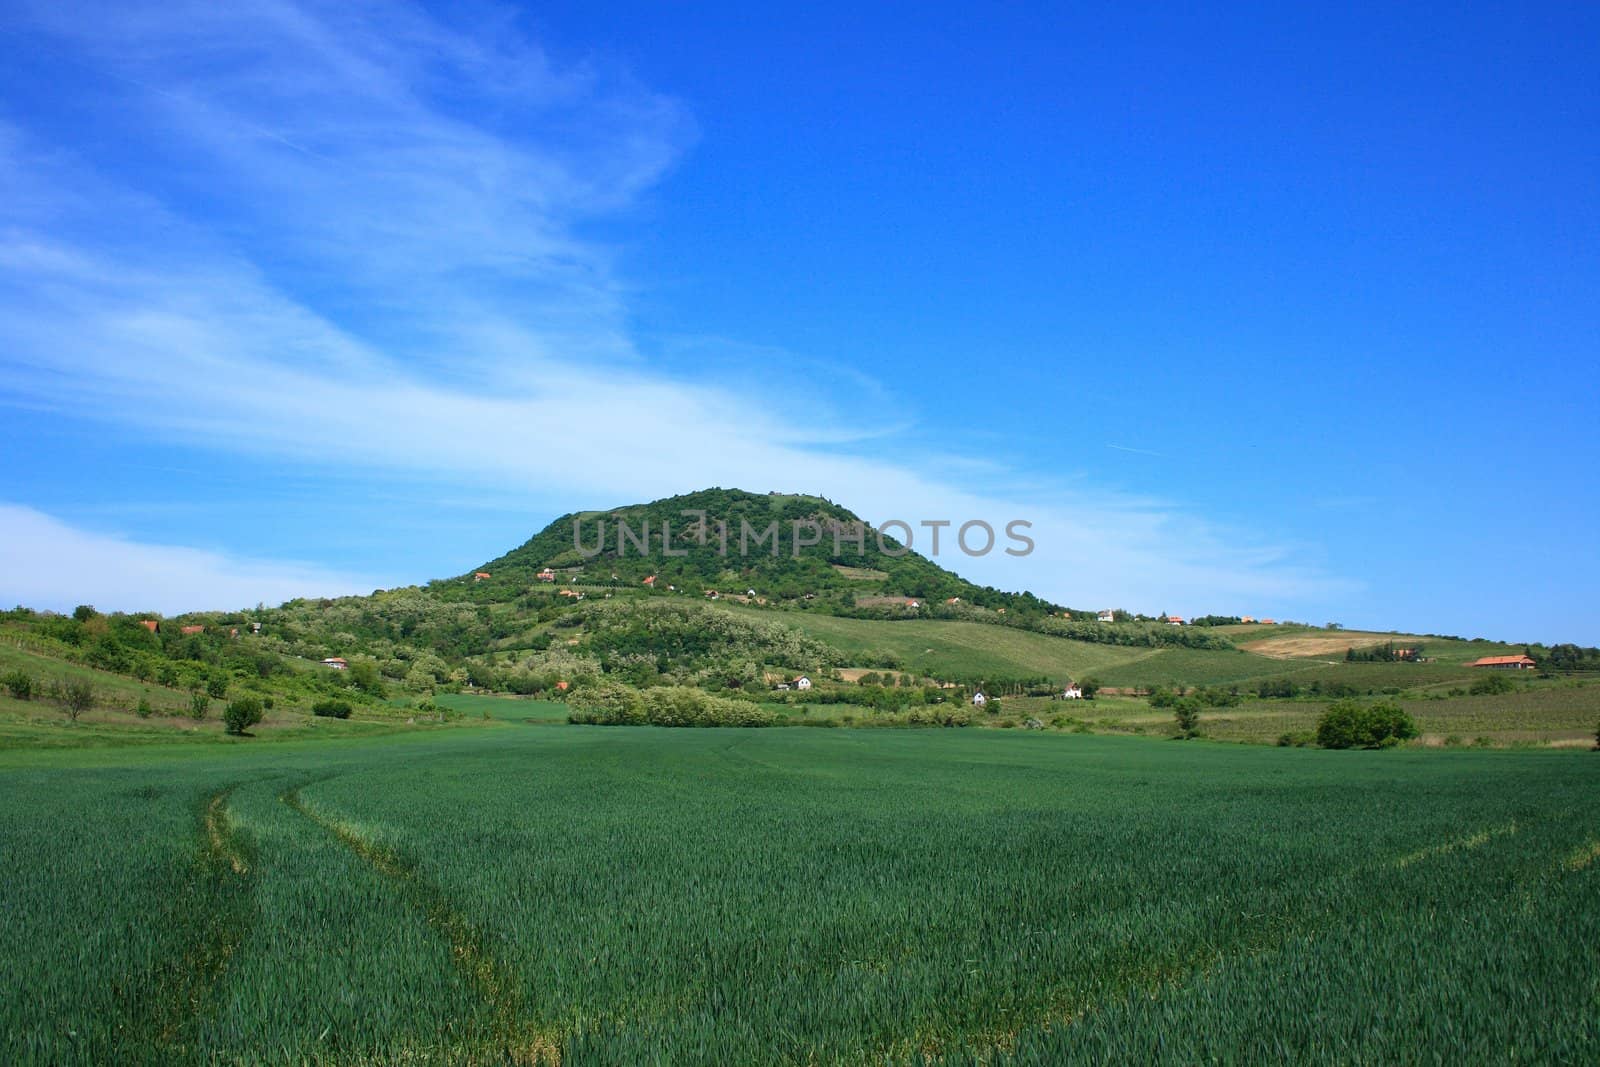 Badacsony mountain in Hungary with a crop field in front.